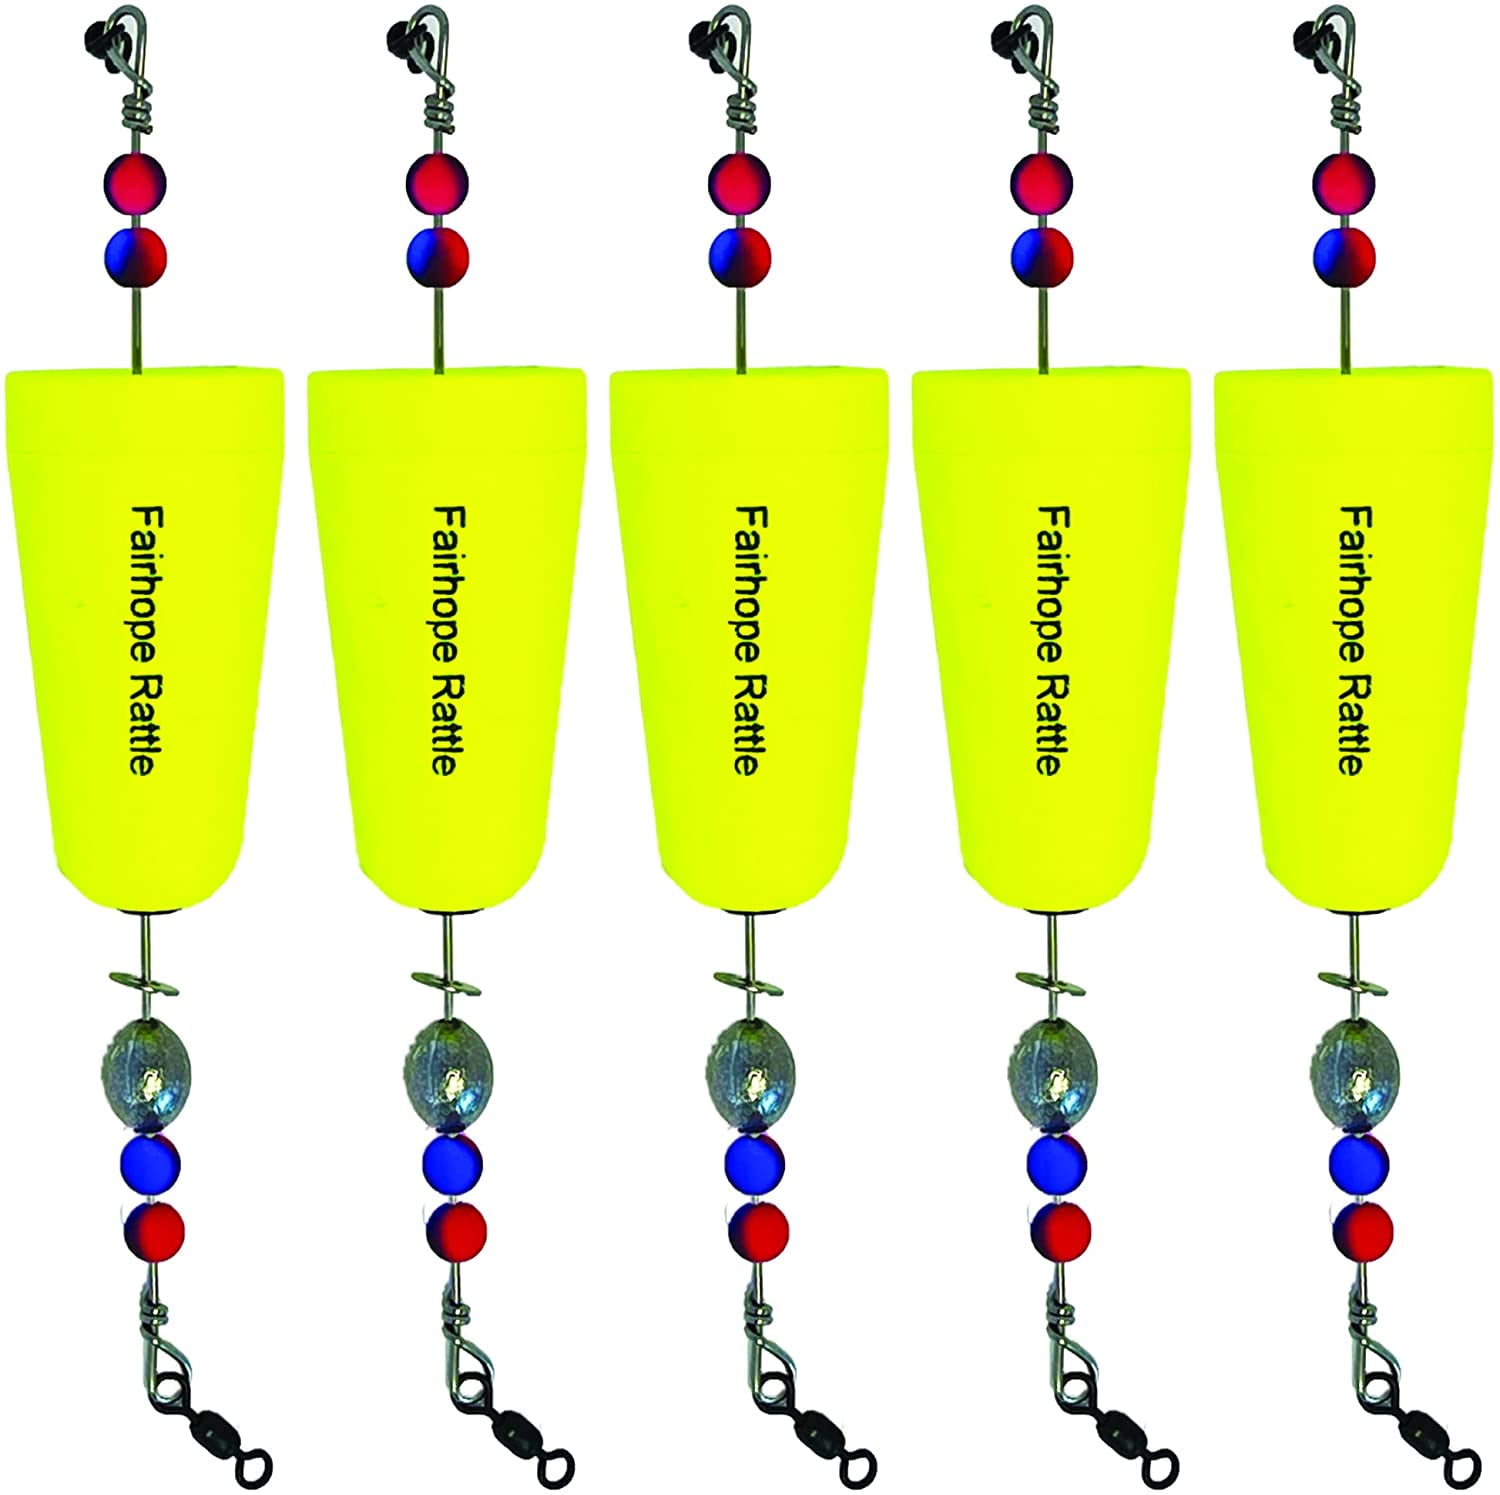 Fairhope Rattle, 5 Fishing Popping Corks, 3 inch Bright Yellow